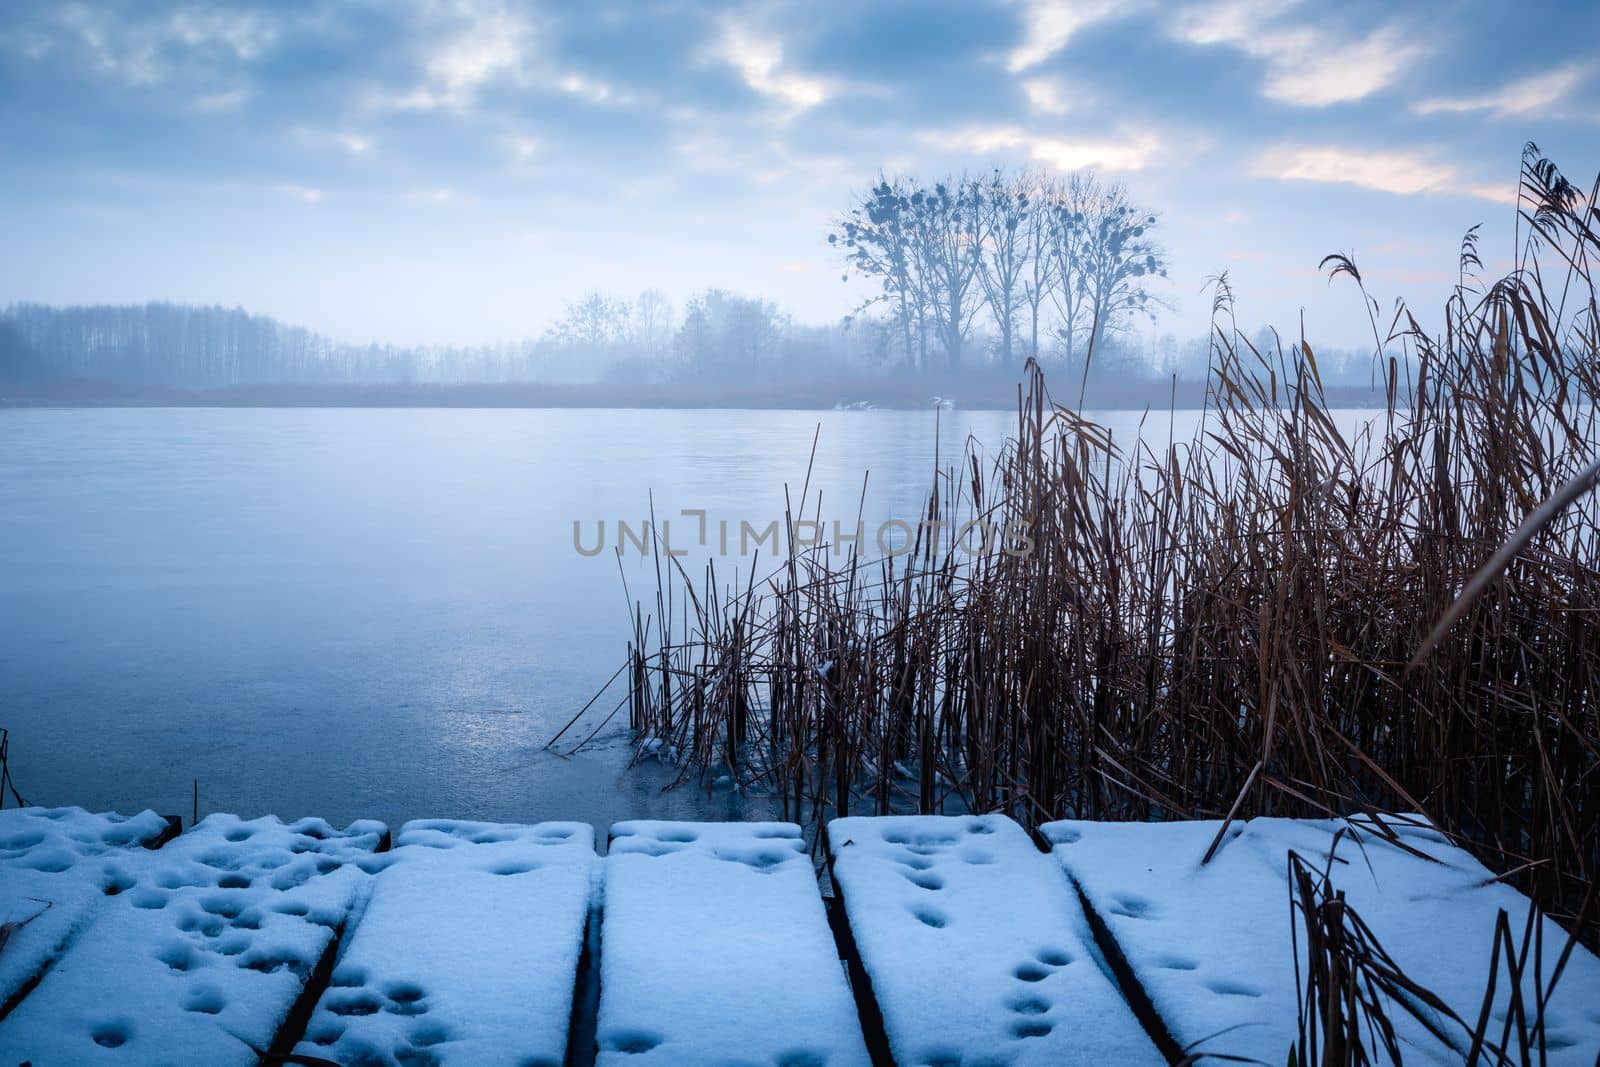 A snow-covered pier and a frozen, misty lake, winter nature landscape